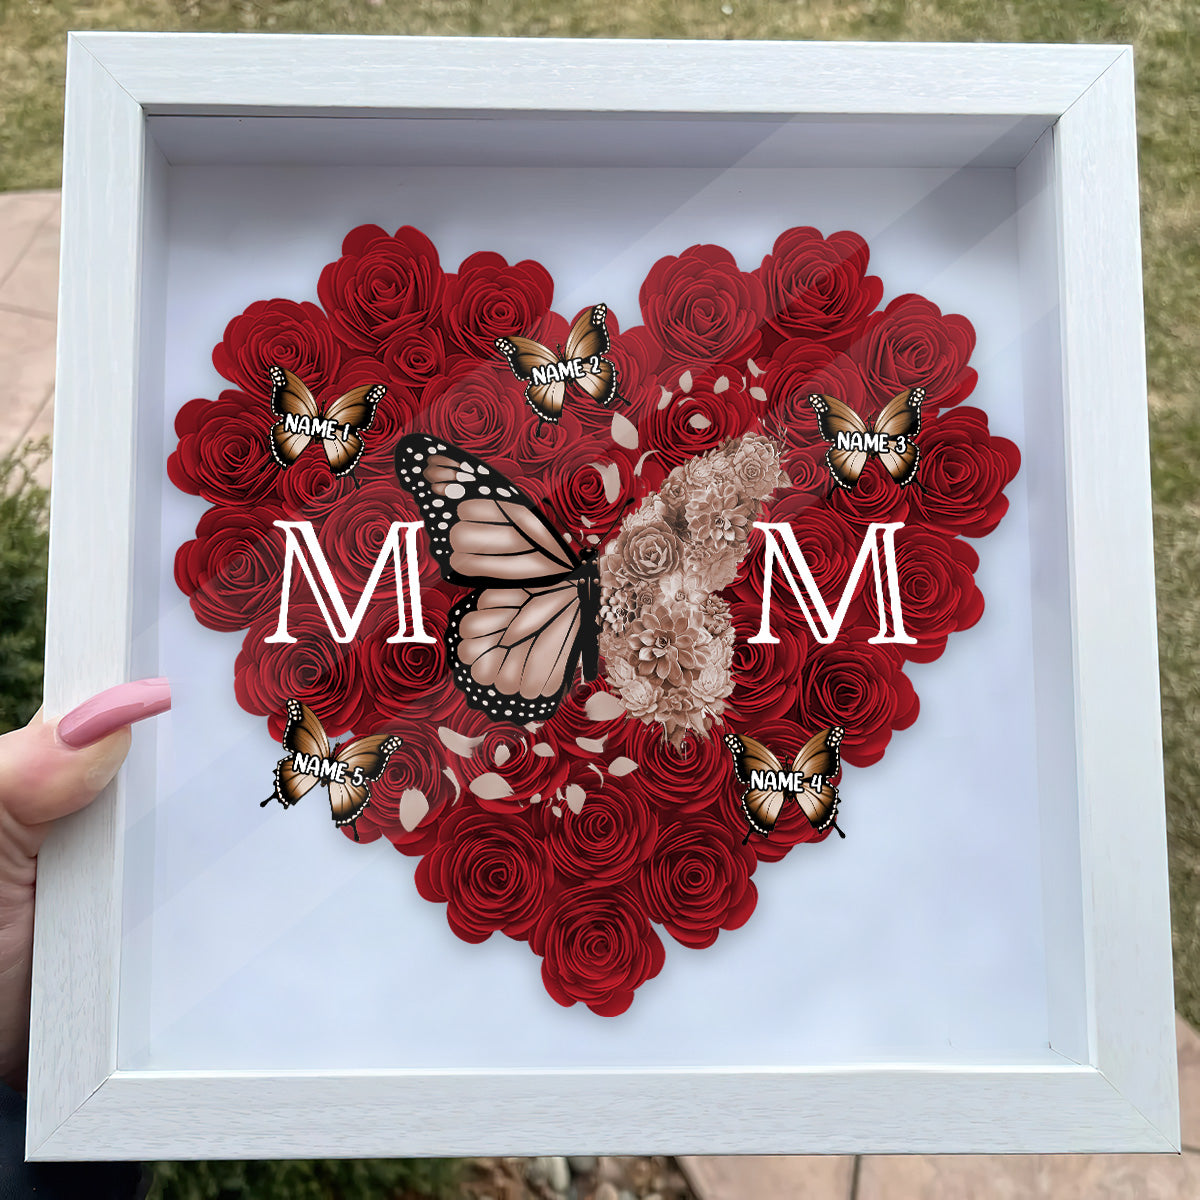 Discover Mom Butterfly Custom Mother's Day Gift Personalized Flower Frame Box